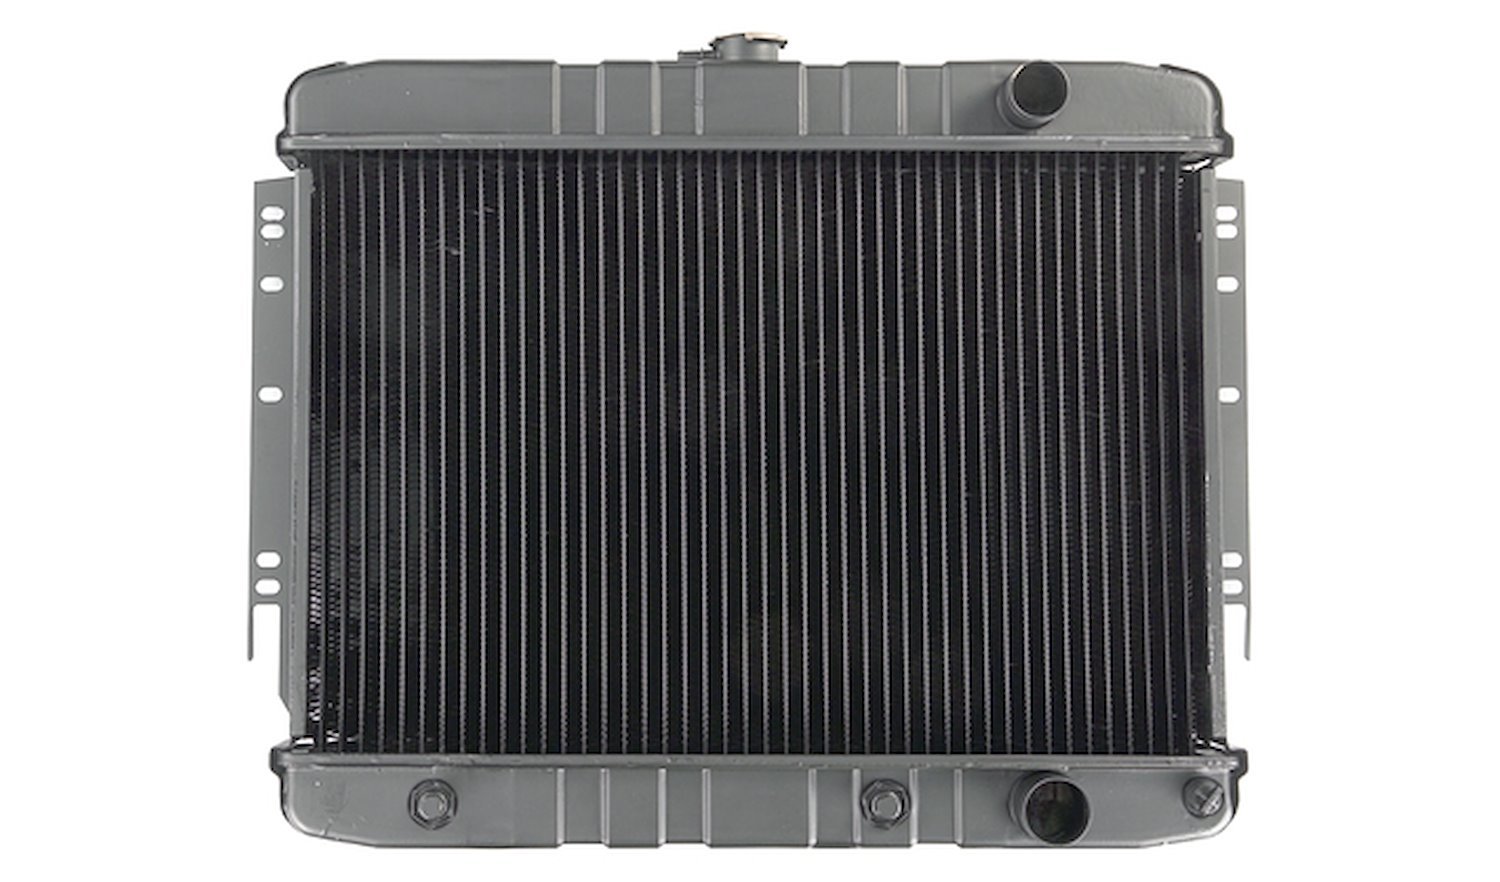 Replacement Radiator for 1960-1965 Chevrolet Impala & 1964-1965 Chevrolet Chevelle w/3.8L, 4.6L, 5.3L Eng. [2-Row]